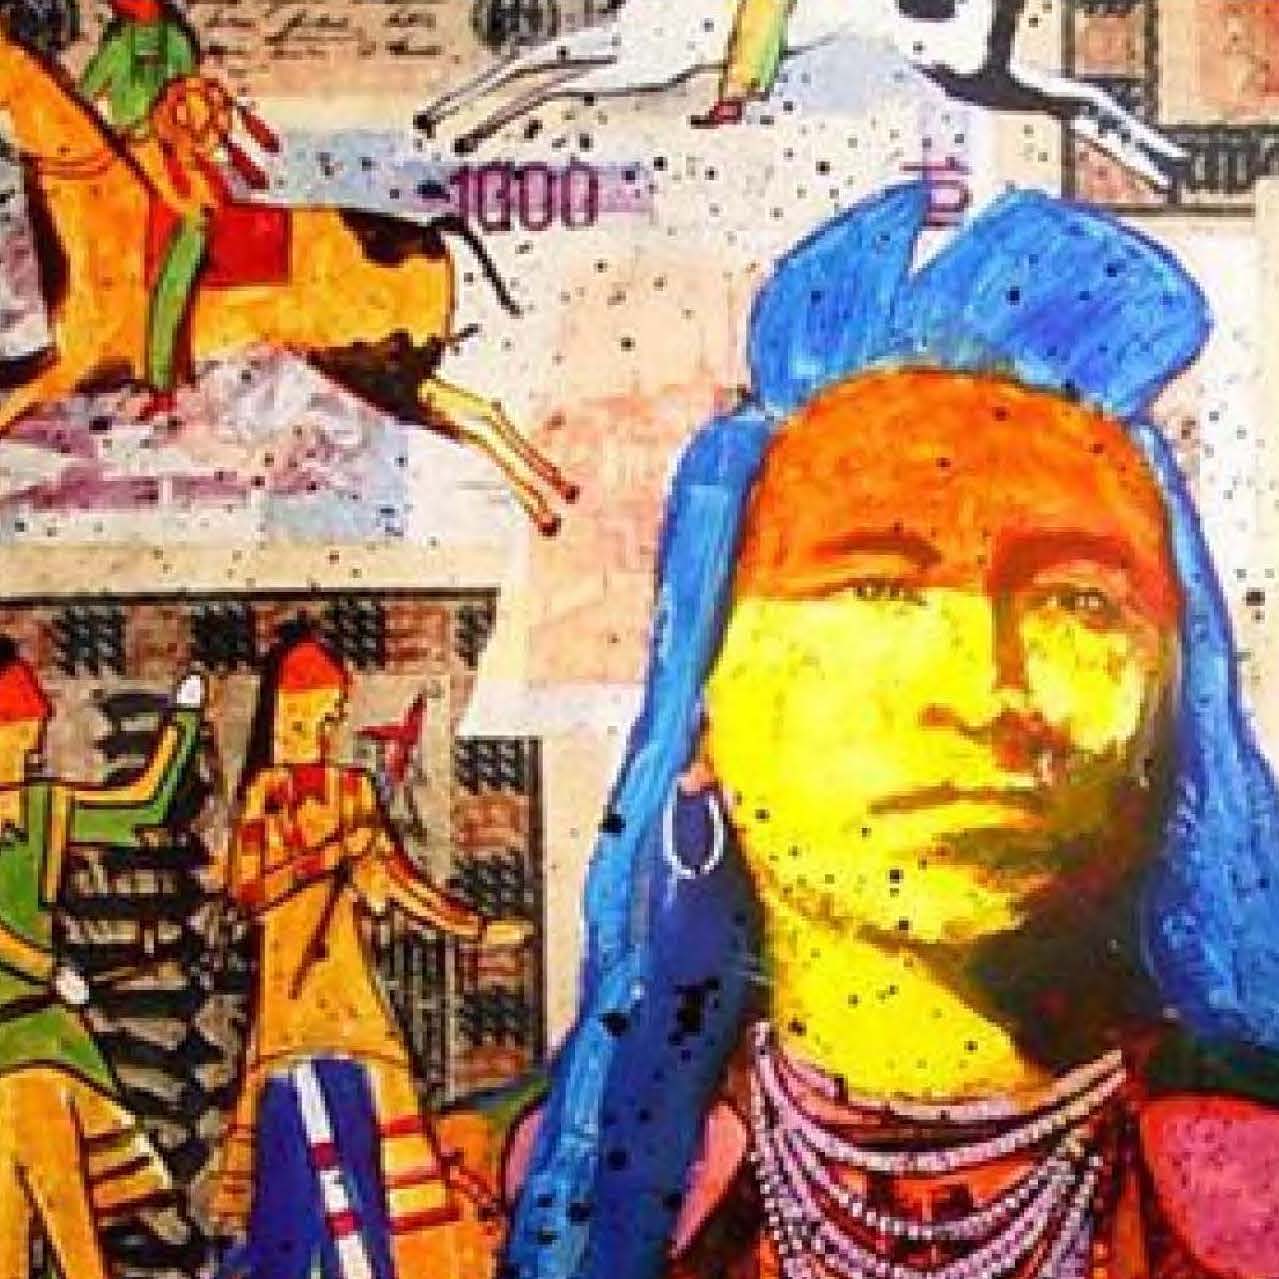 Contribute to Many Faces of Native America Art Show